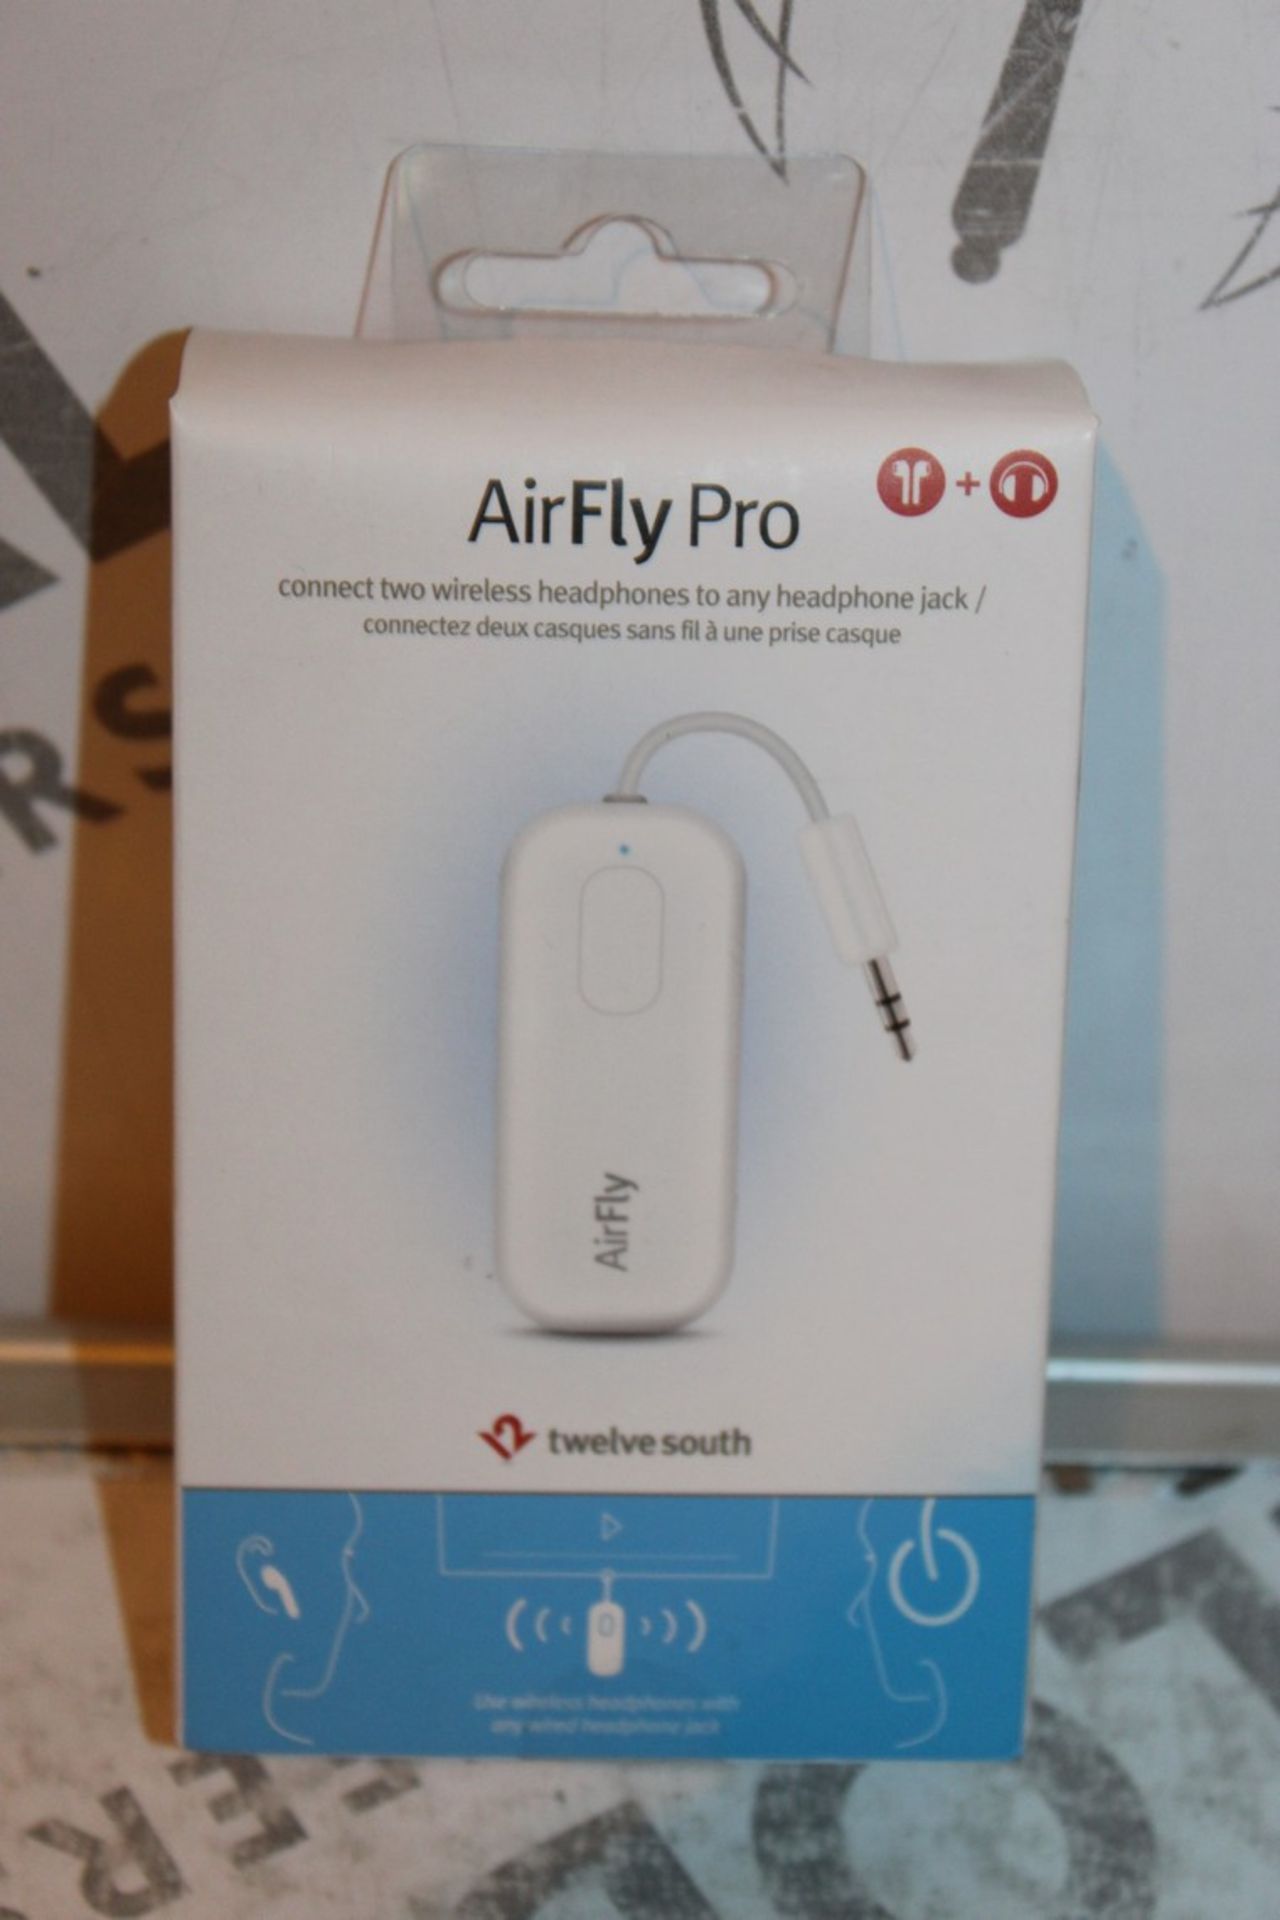 Lot to Contain 10 Boxed AirFly Pro by Twelve South, Wireless Headphone Jack Connectors, Combined